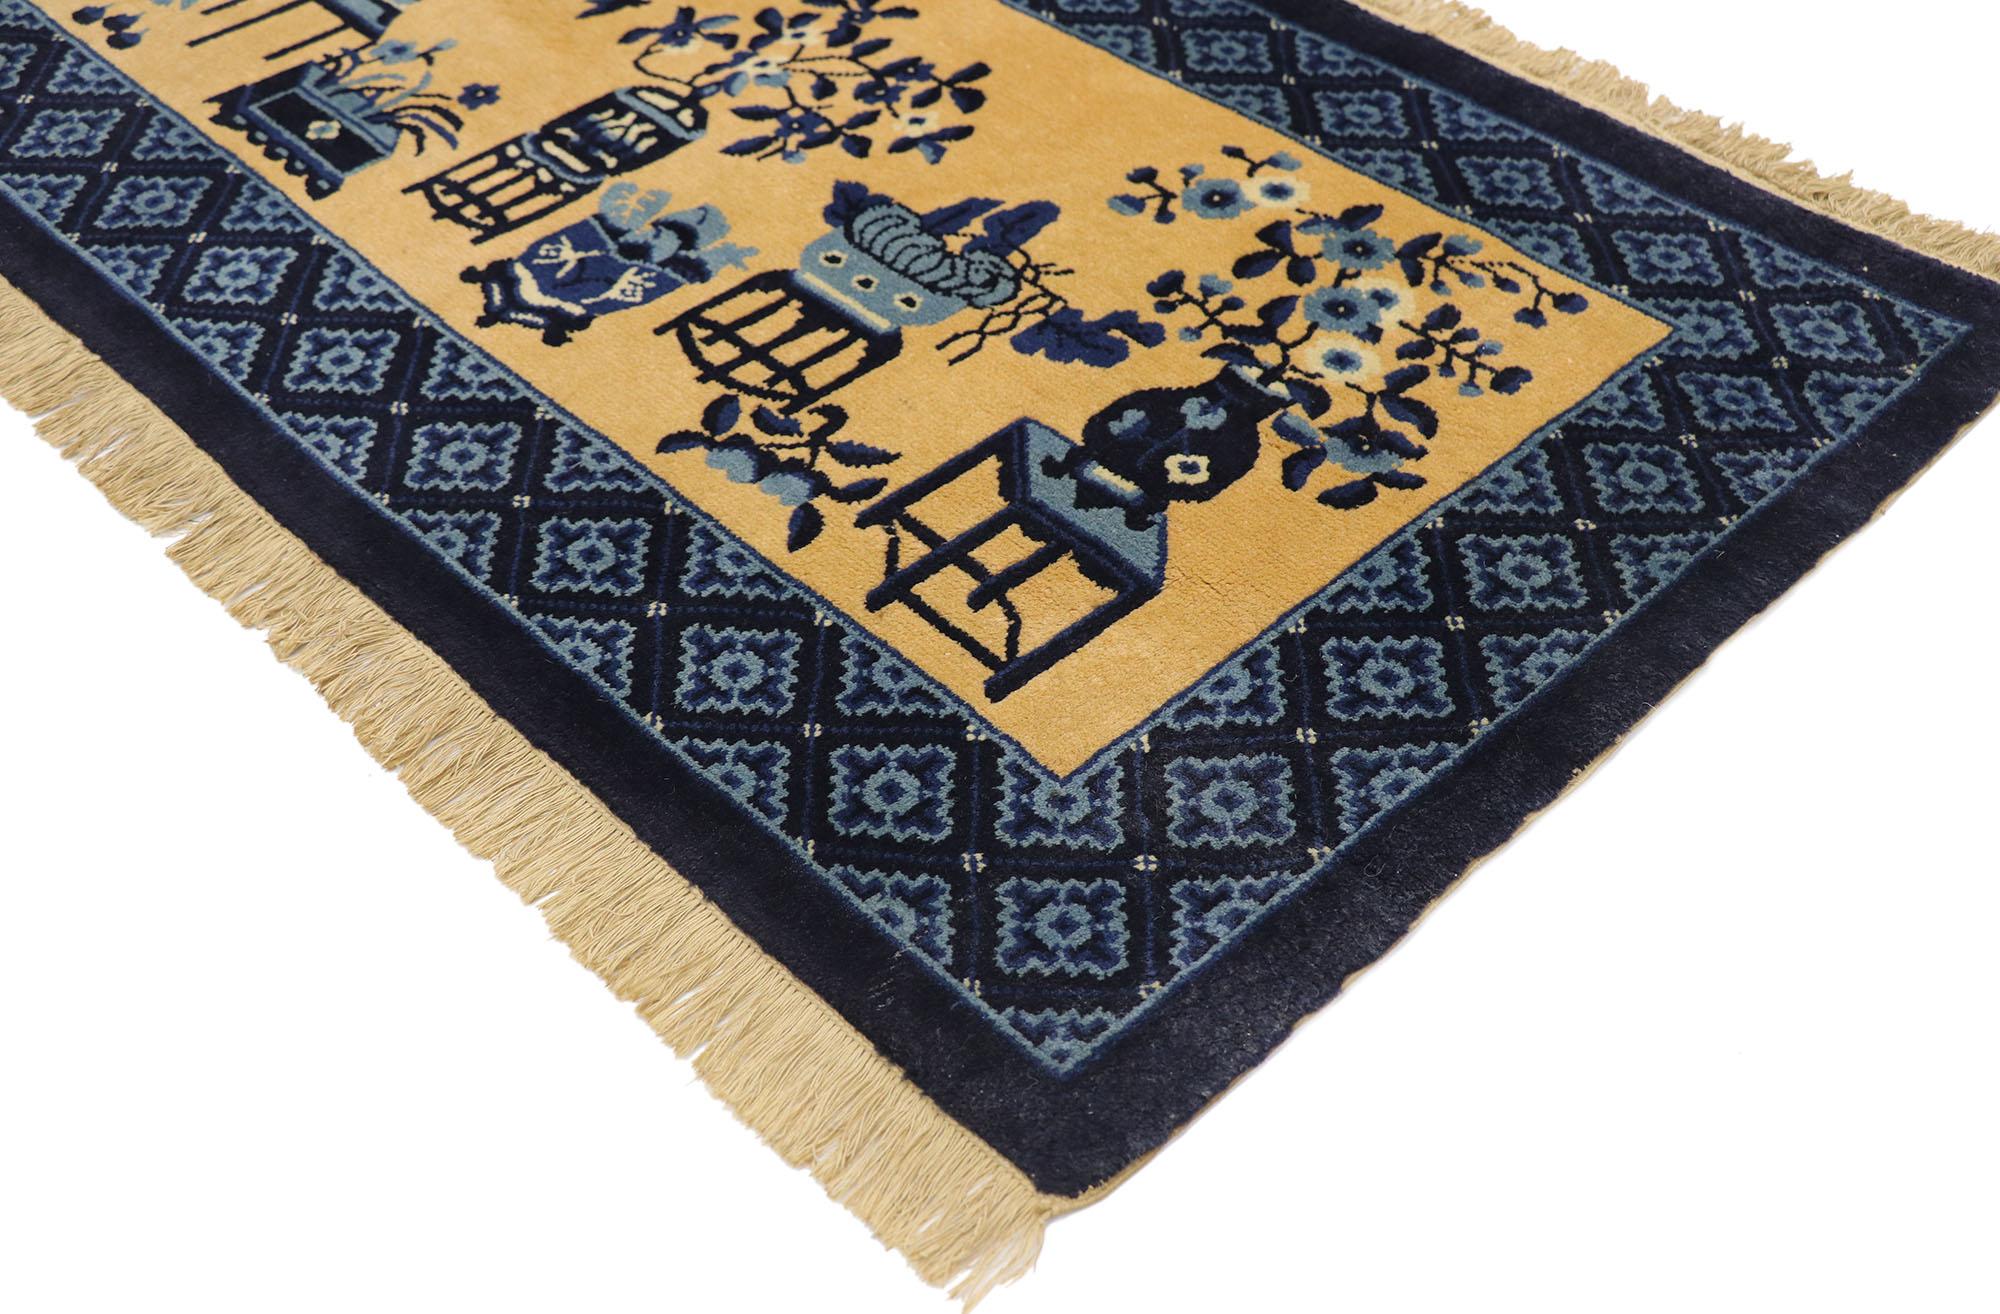 77587, vintage Chinese Baotou Vase Pictorial rug with Chinese Chippendale style. This hand-knotted wool vintage Chinese Baotou pictorial rug features an abrashed tan field showcasing different types of cloisonné vases sprouting with stylized florals